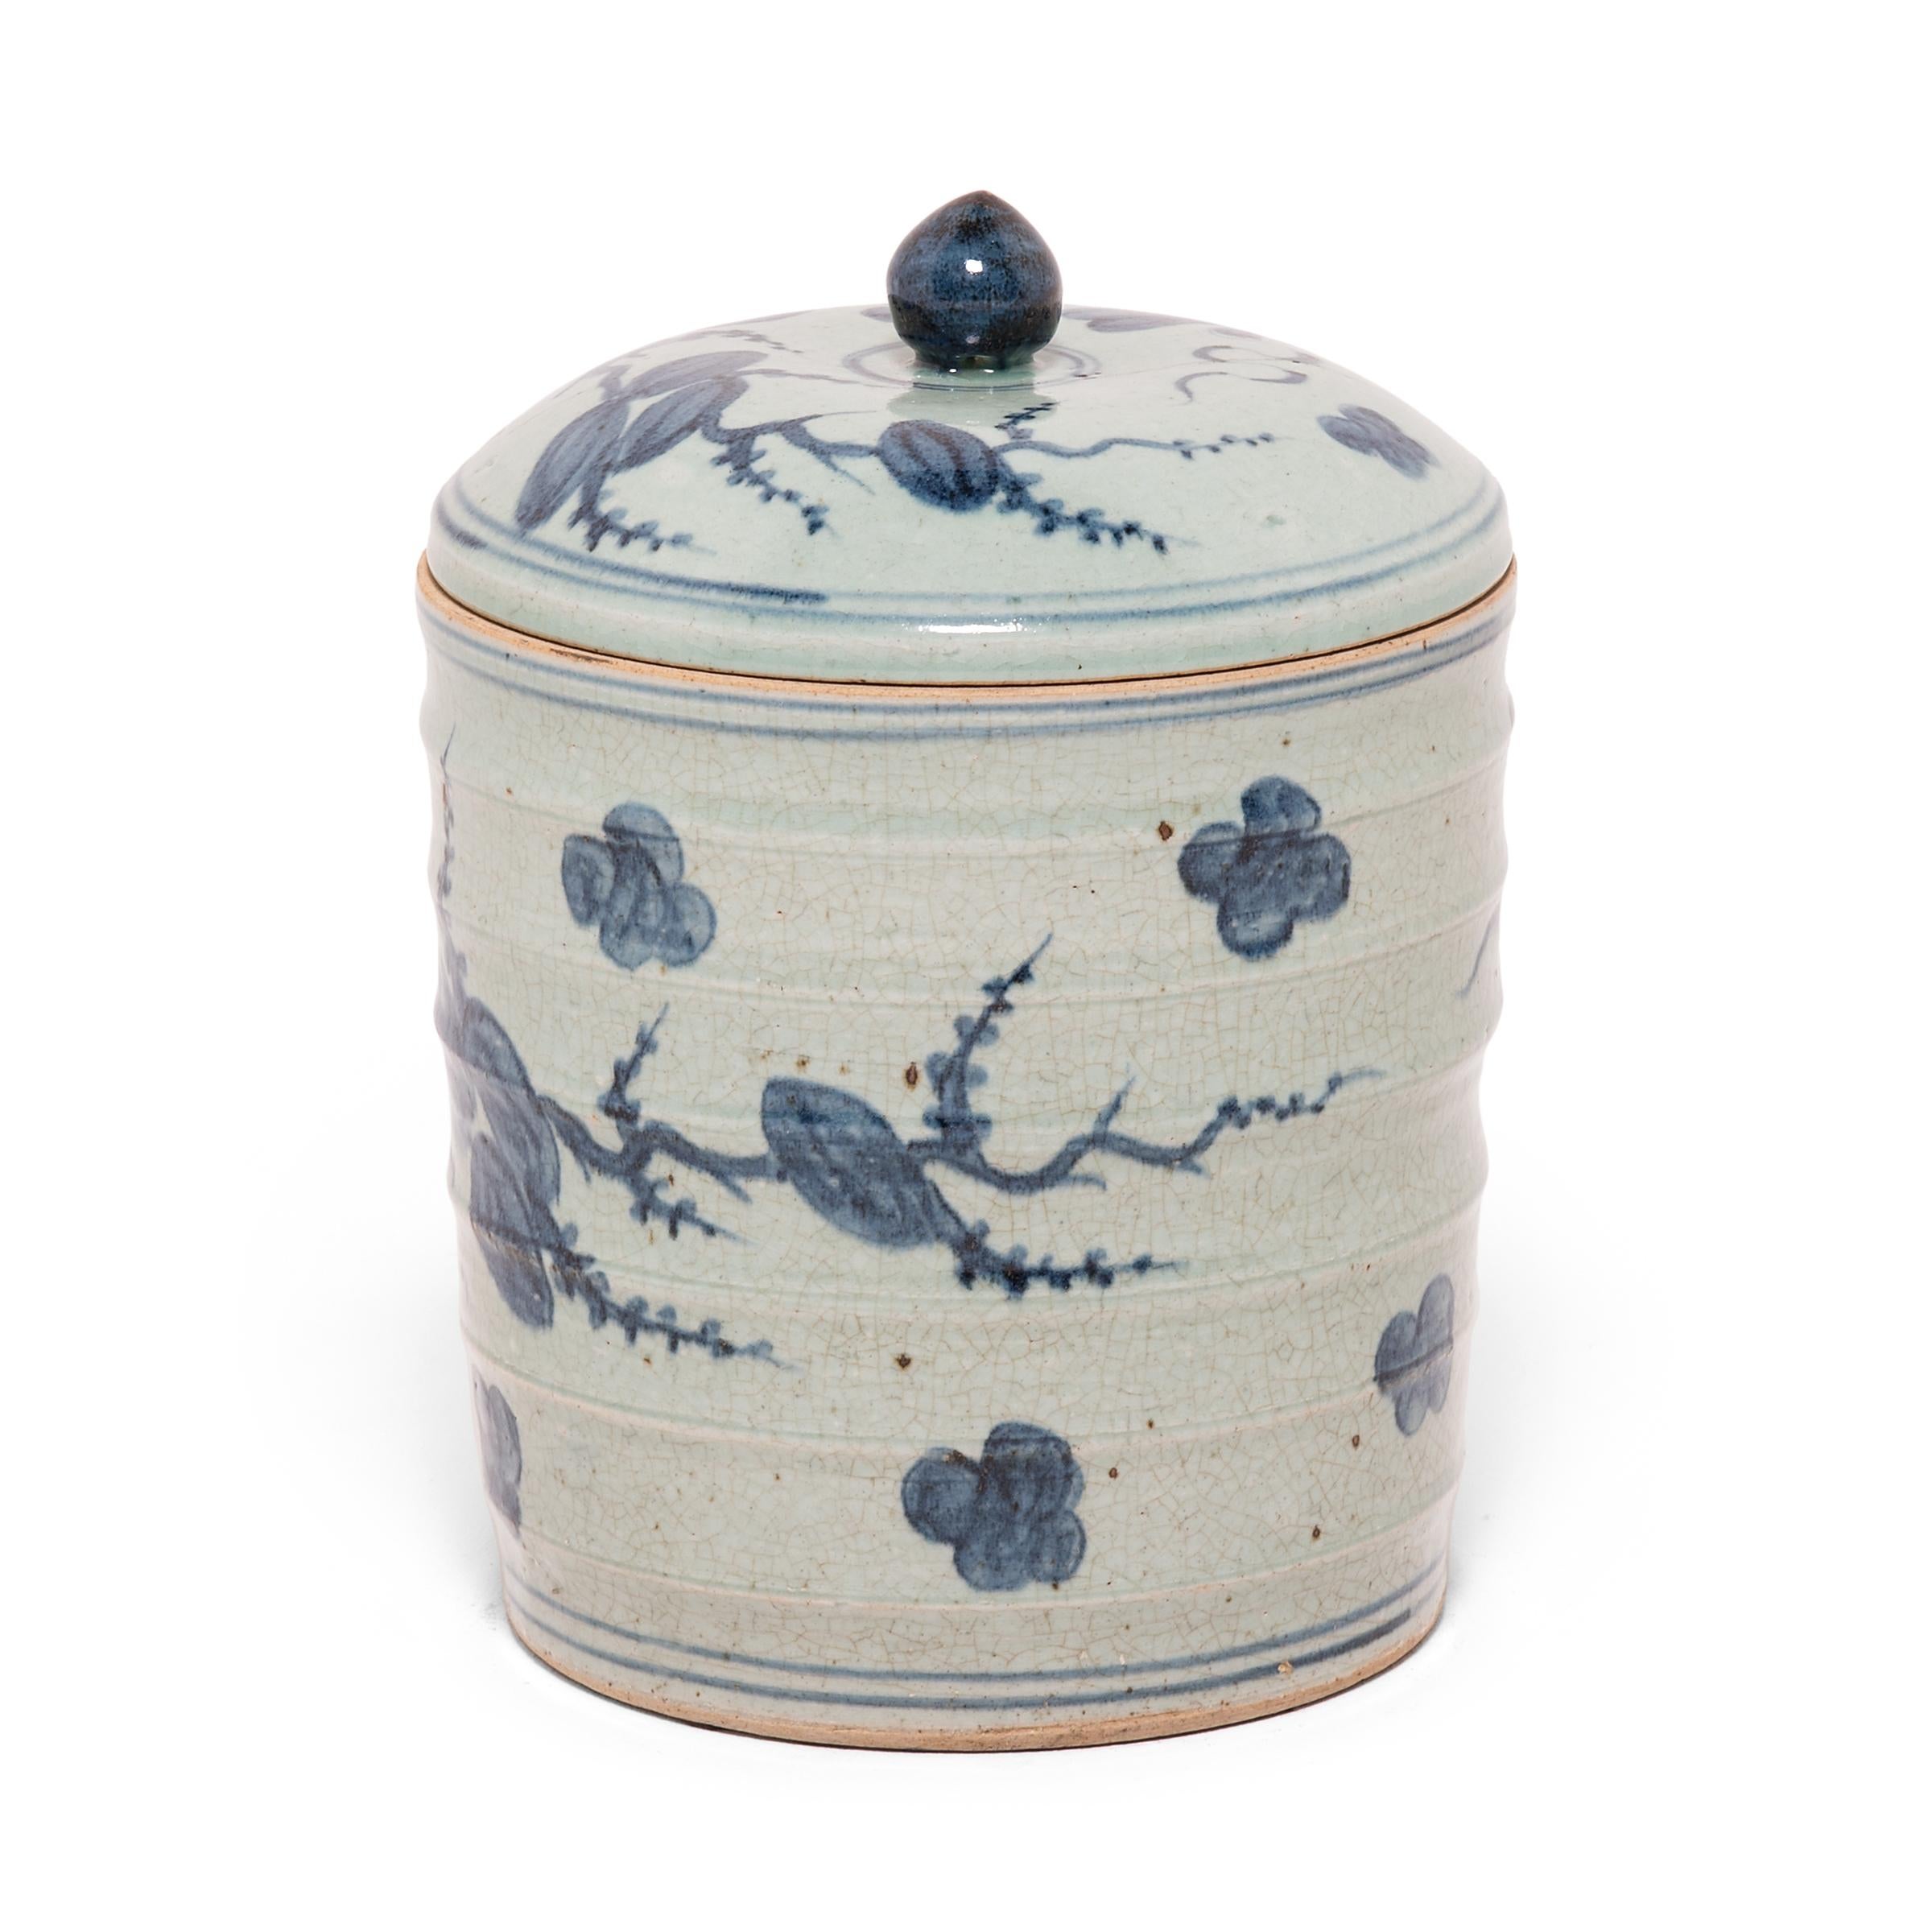 A lidded jar of this scale would have originally been used to store bushels of tea leaves. This contemporary example is hand painted with a cherry blossom motif representing feminine beauty. Freely brushed in dark blue, the artist’s expressive